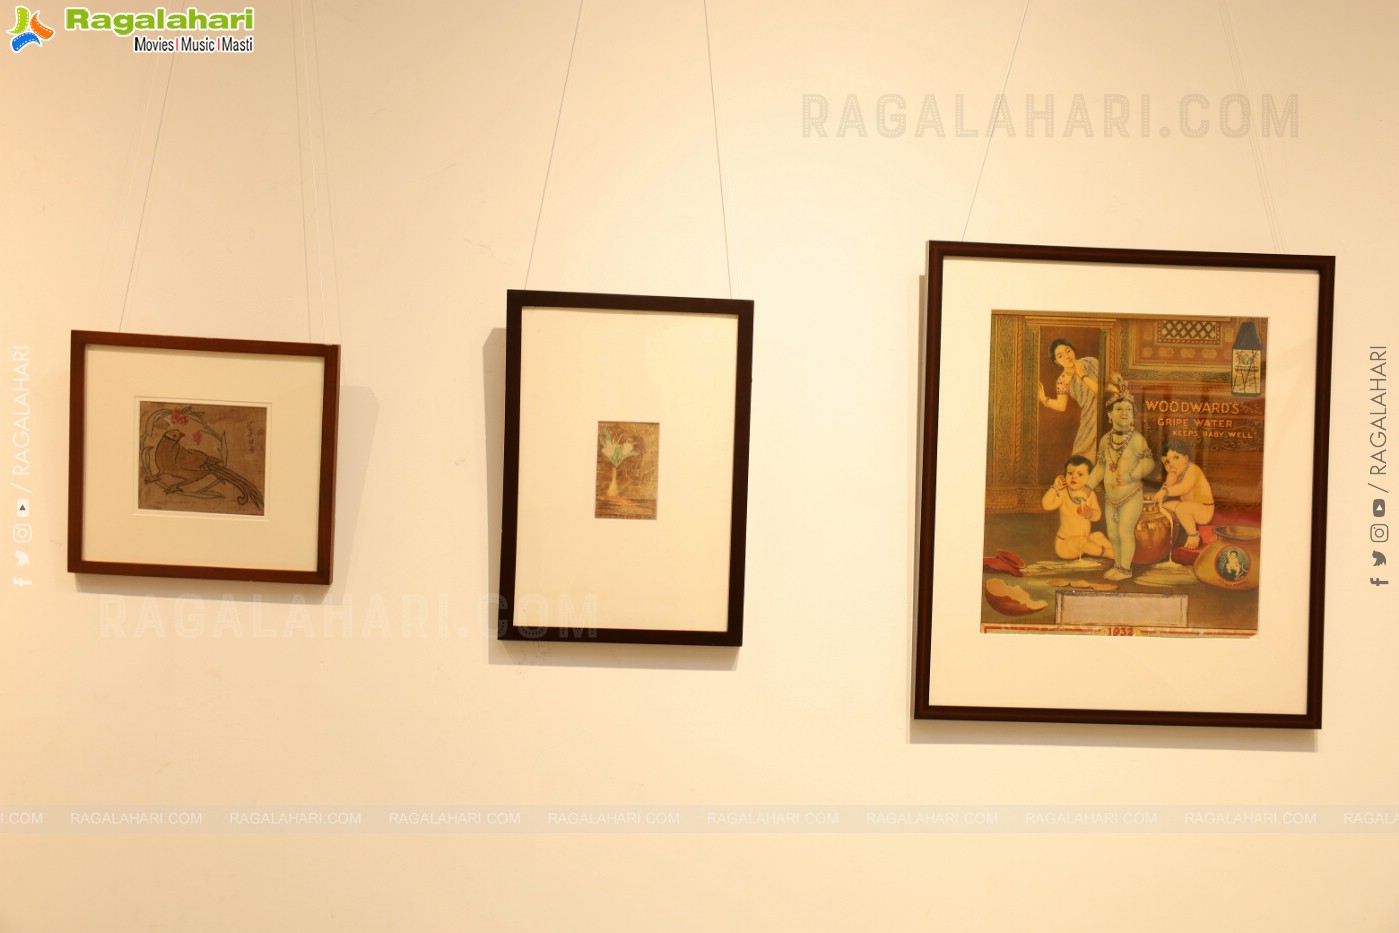 Inauguration of Hindustan Files Art Gallery at Chitramayee State Gallery of Art